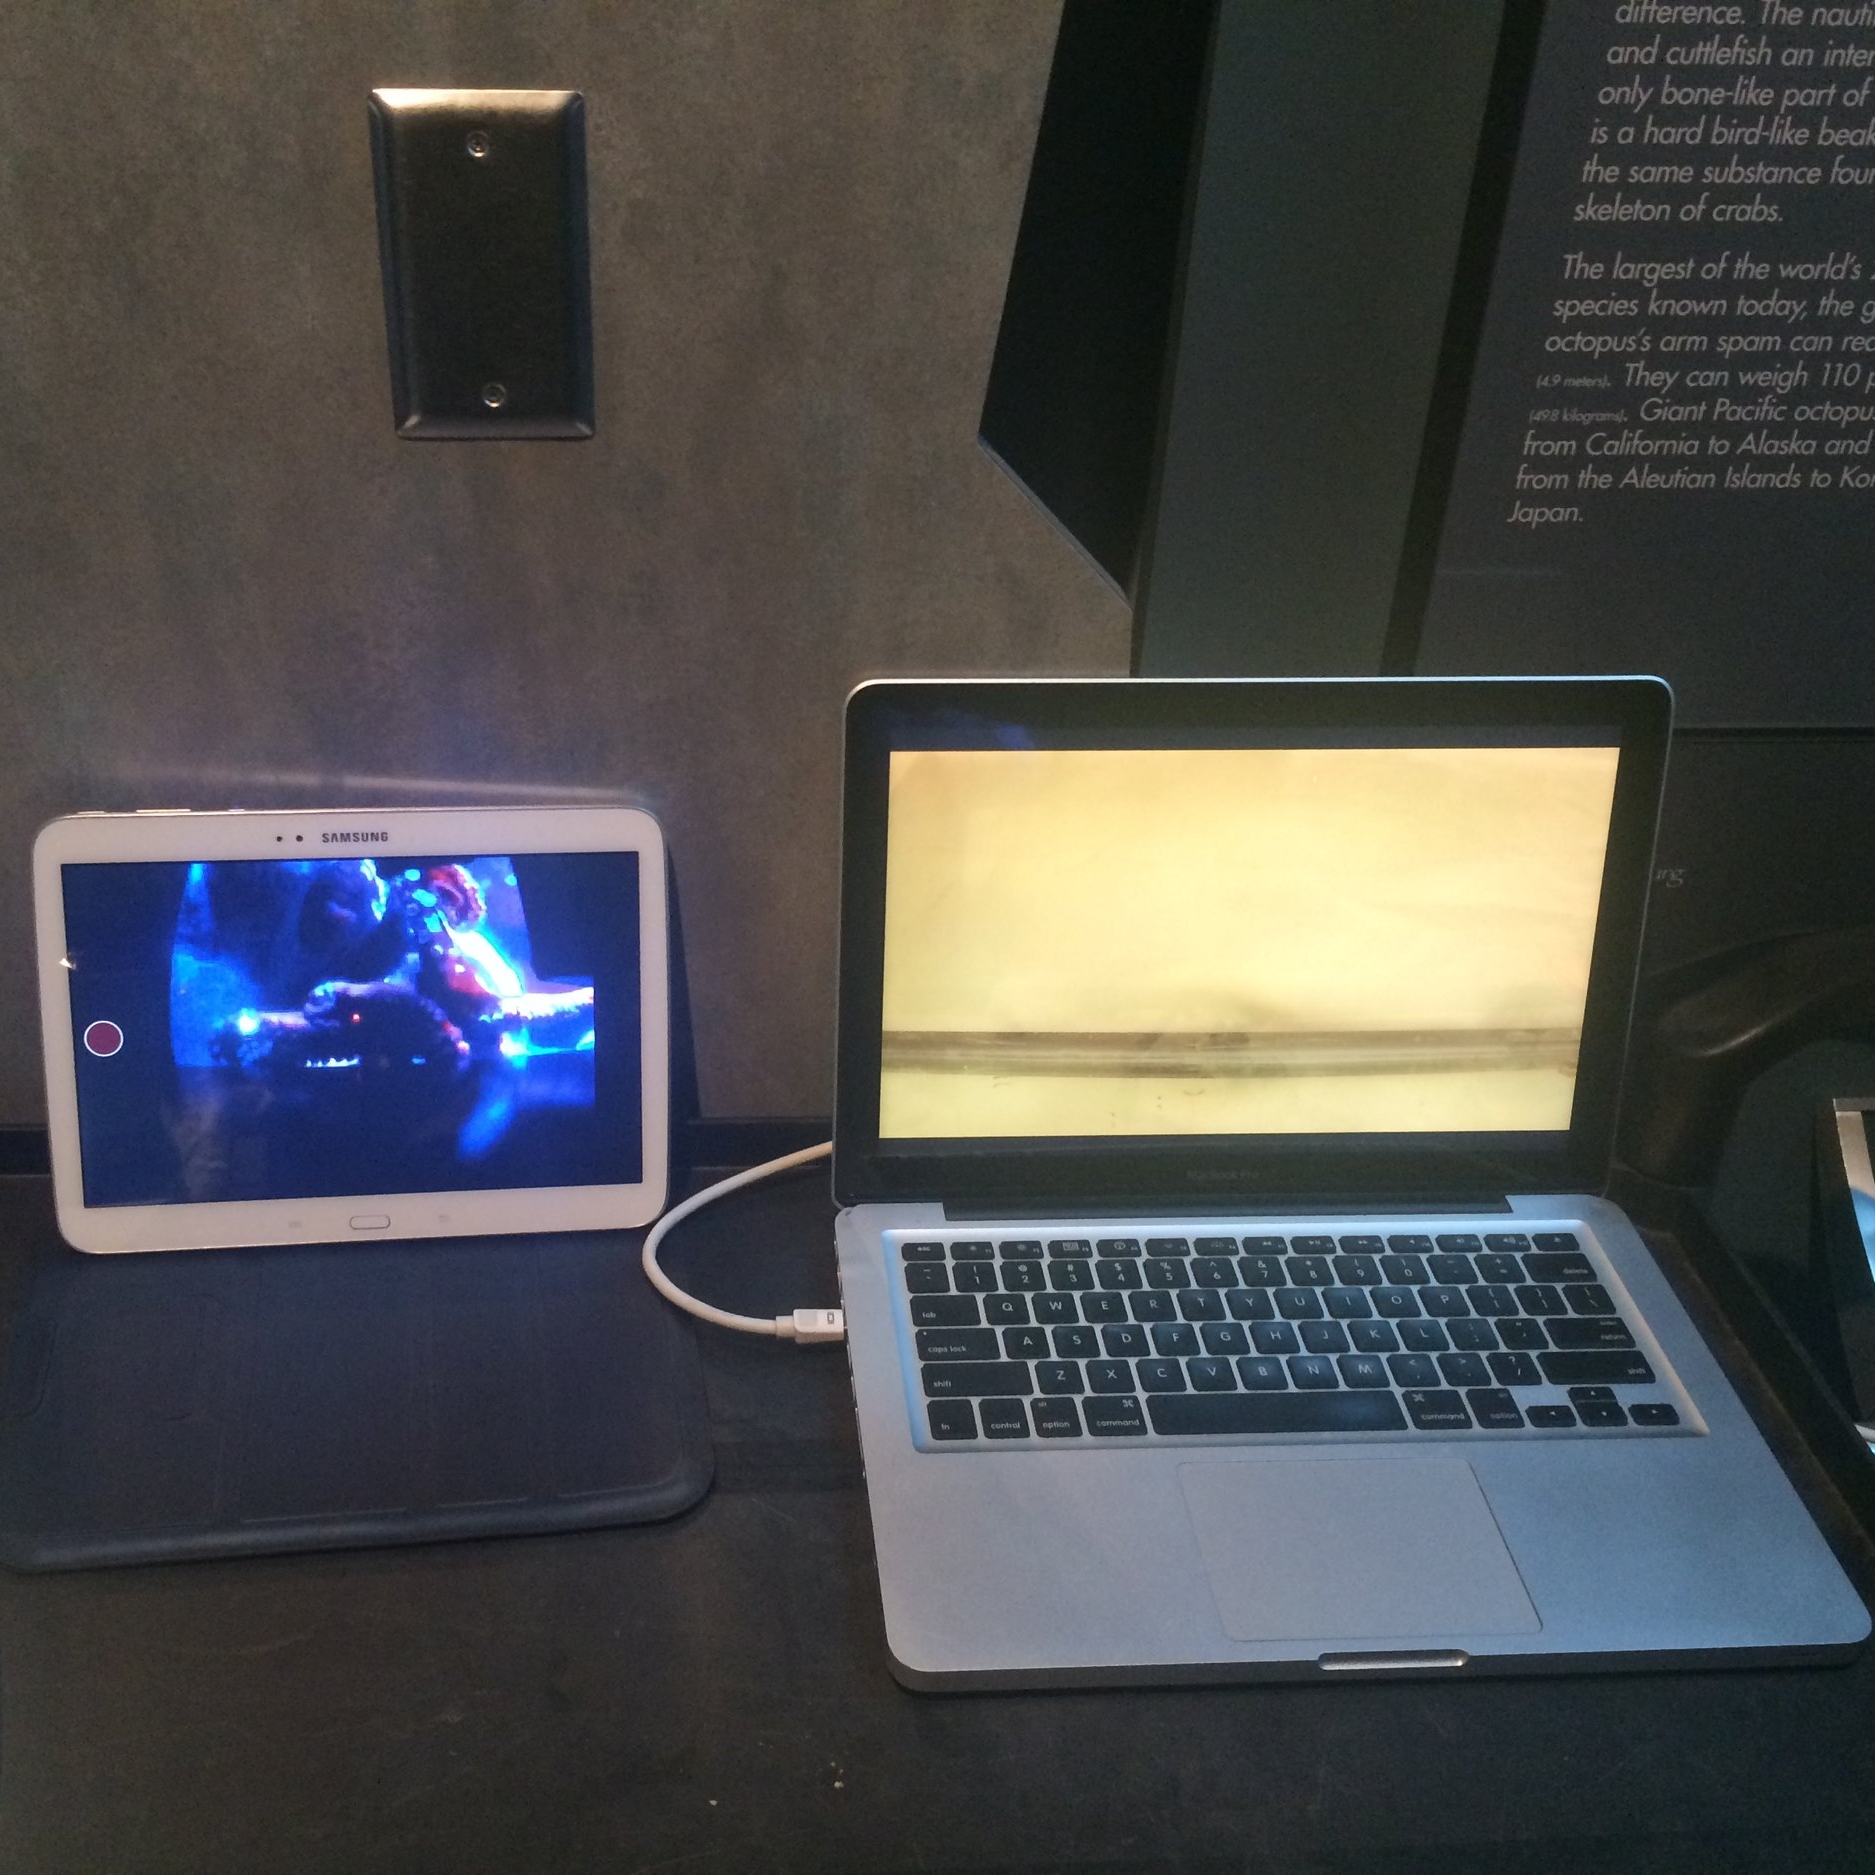  A tablet displays a live video feed of the GPO's reactions (left) while the laptop connected to the TV screen behind the curtain plays the trial video (right). 